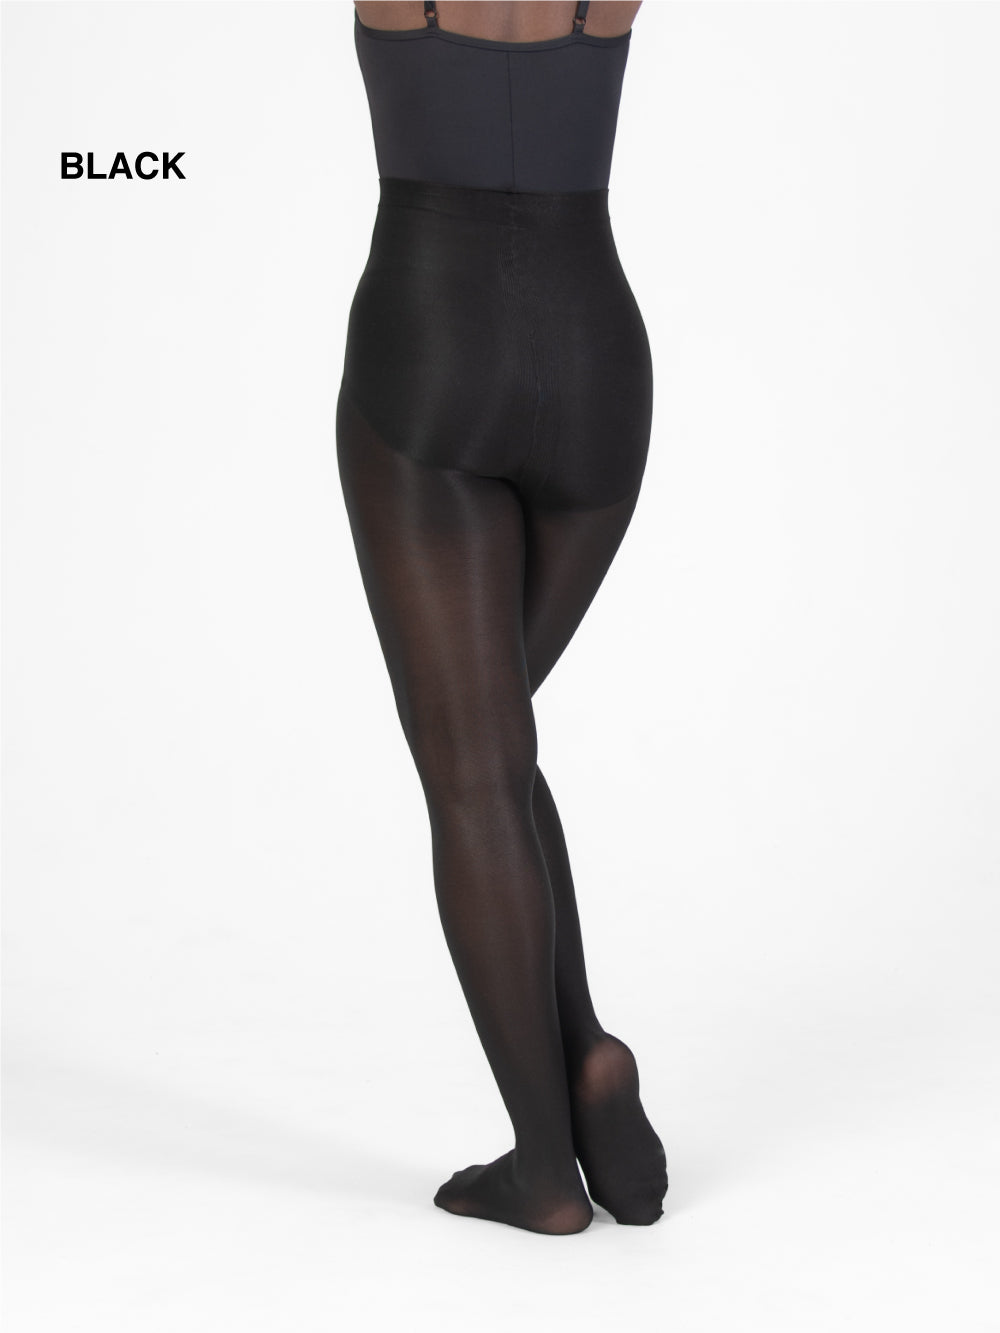 TotalSTRETCH Seamless Shimmer Footed Tights